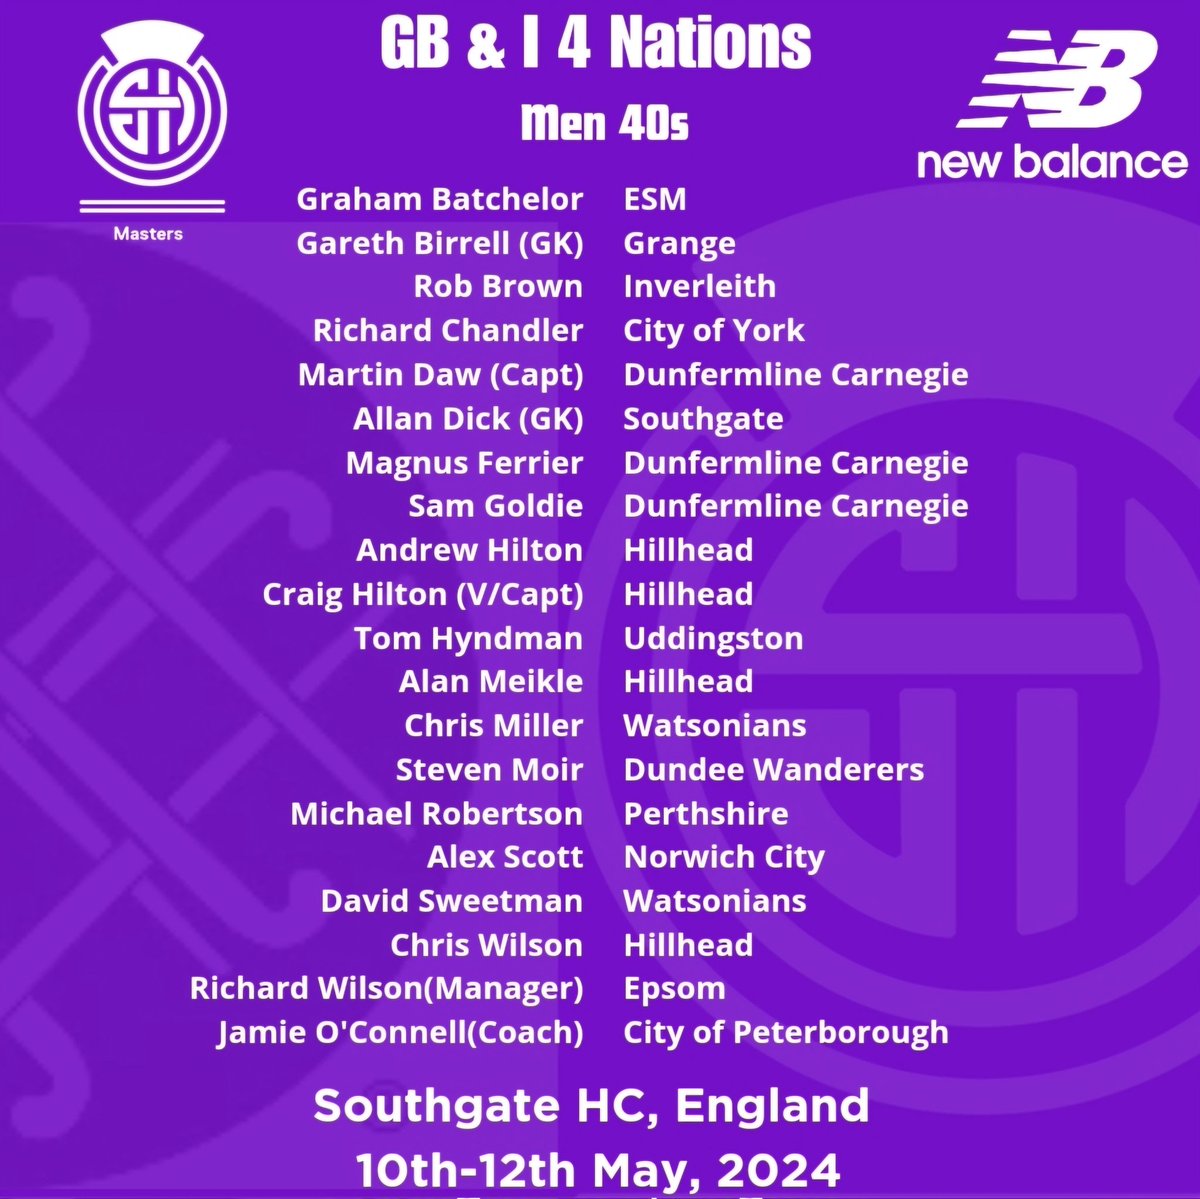 Well, this weekend sees the start of the GB & I 4Ns tournaments. First up is the M40/M50s competition in Southgate this weekend. The hard work and training have been completed. Safe travels to our M40s Squad, who start travelling down South today.@ScottishHockey @Wrld_Mstrs_Hcky